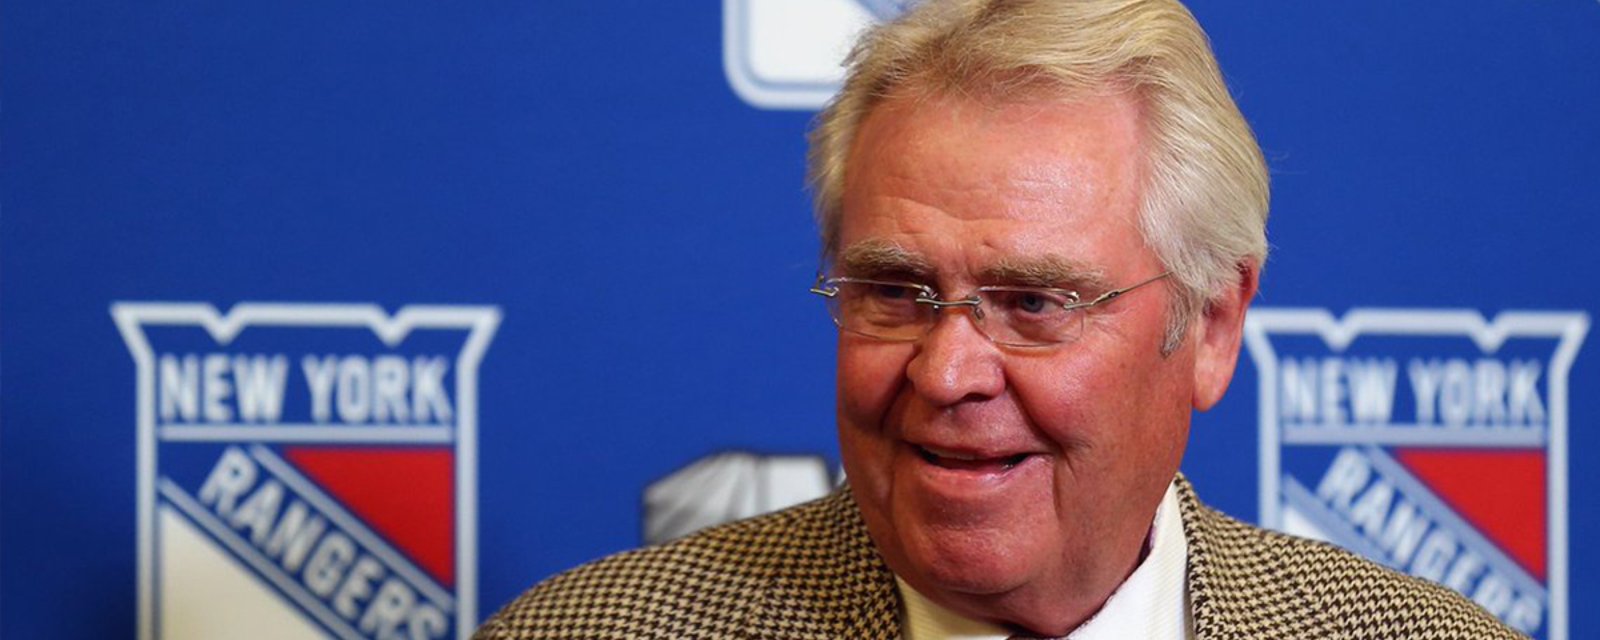 Breaking: Sather out as Rangers president, executive from divisional rival tabbed as his replacement 